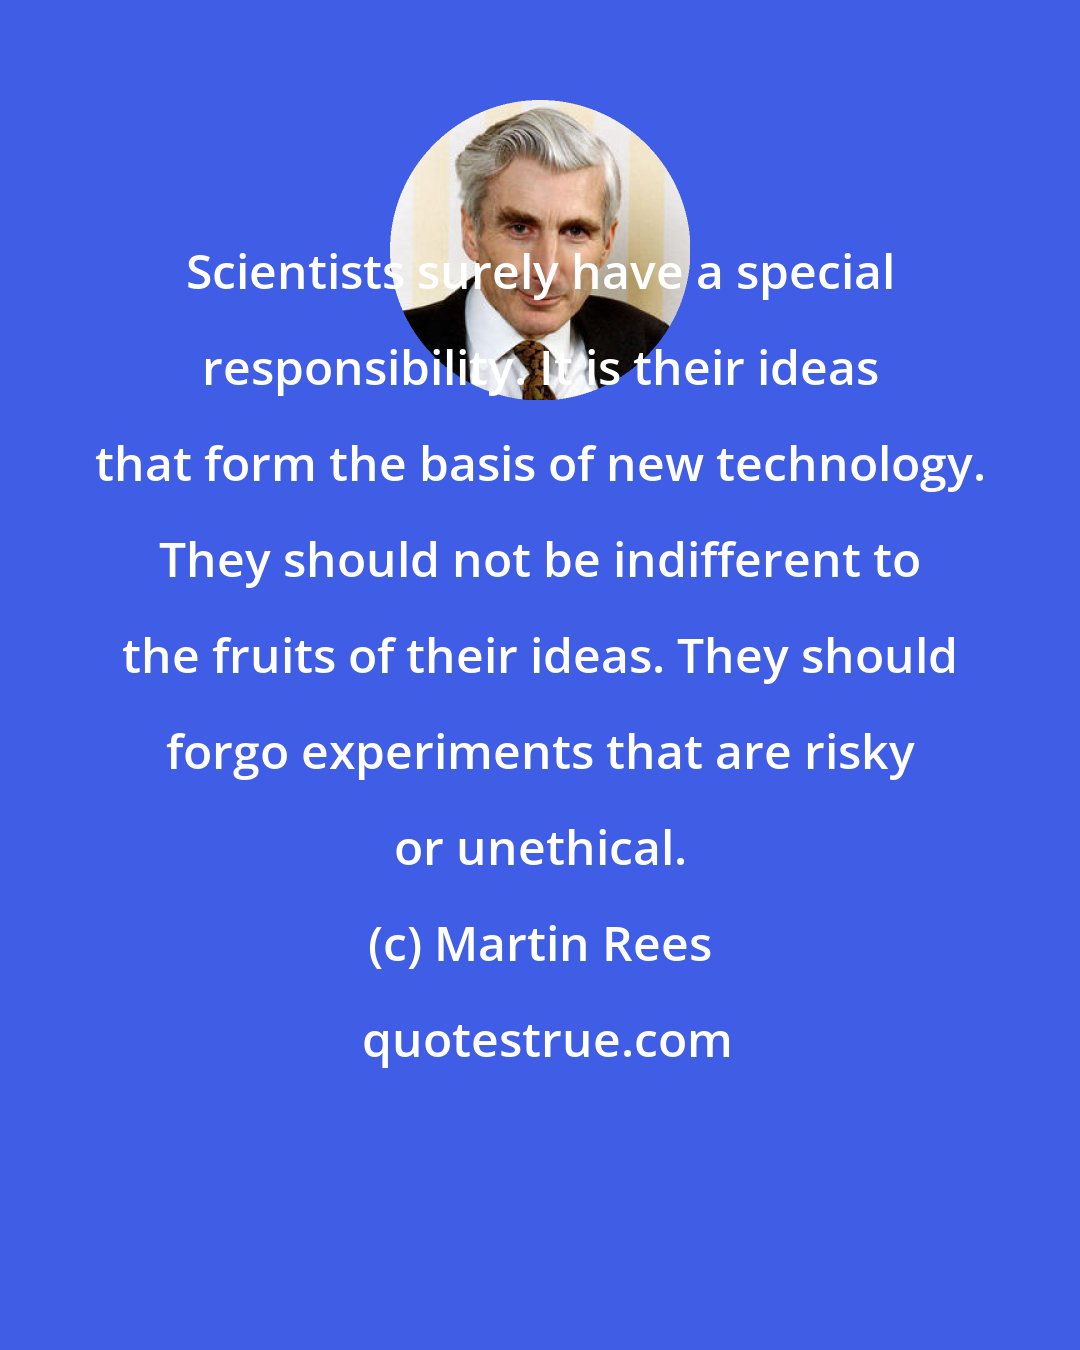 Martin Rees: Scientists surely have a special responsibility. It is their ideas that form the basis of new technology. They should not be indifferent to the fruits of their ideas. They should forgo experiments that are risky or unethical.